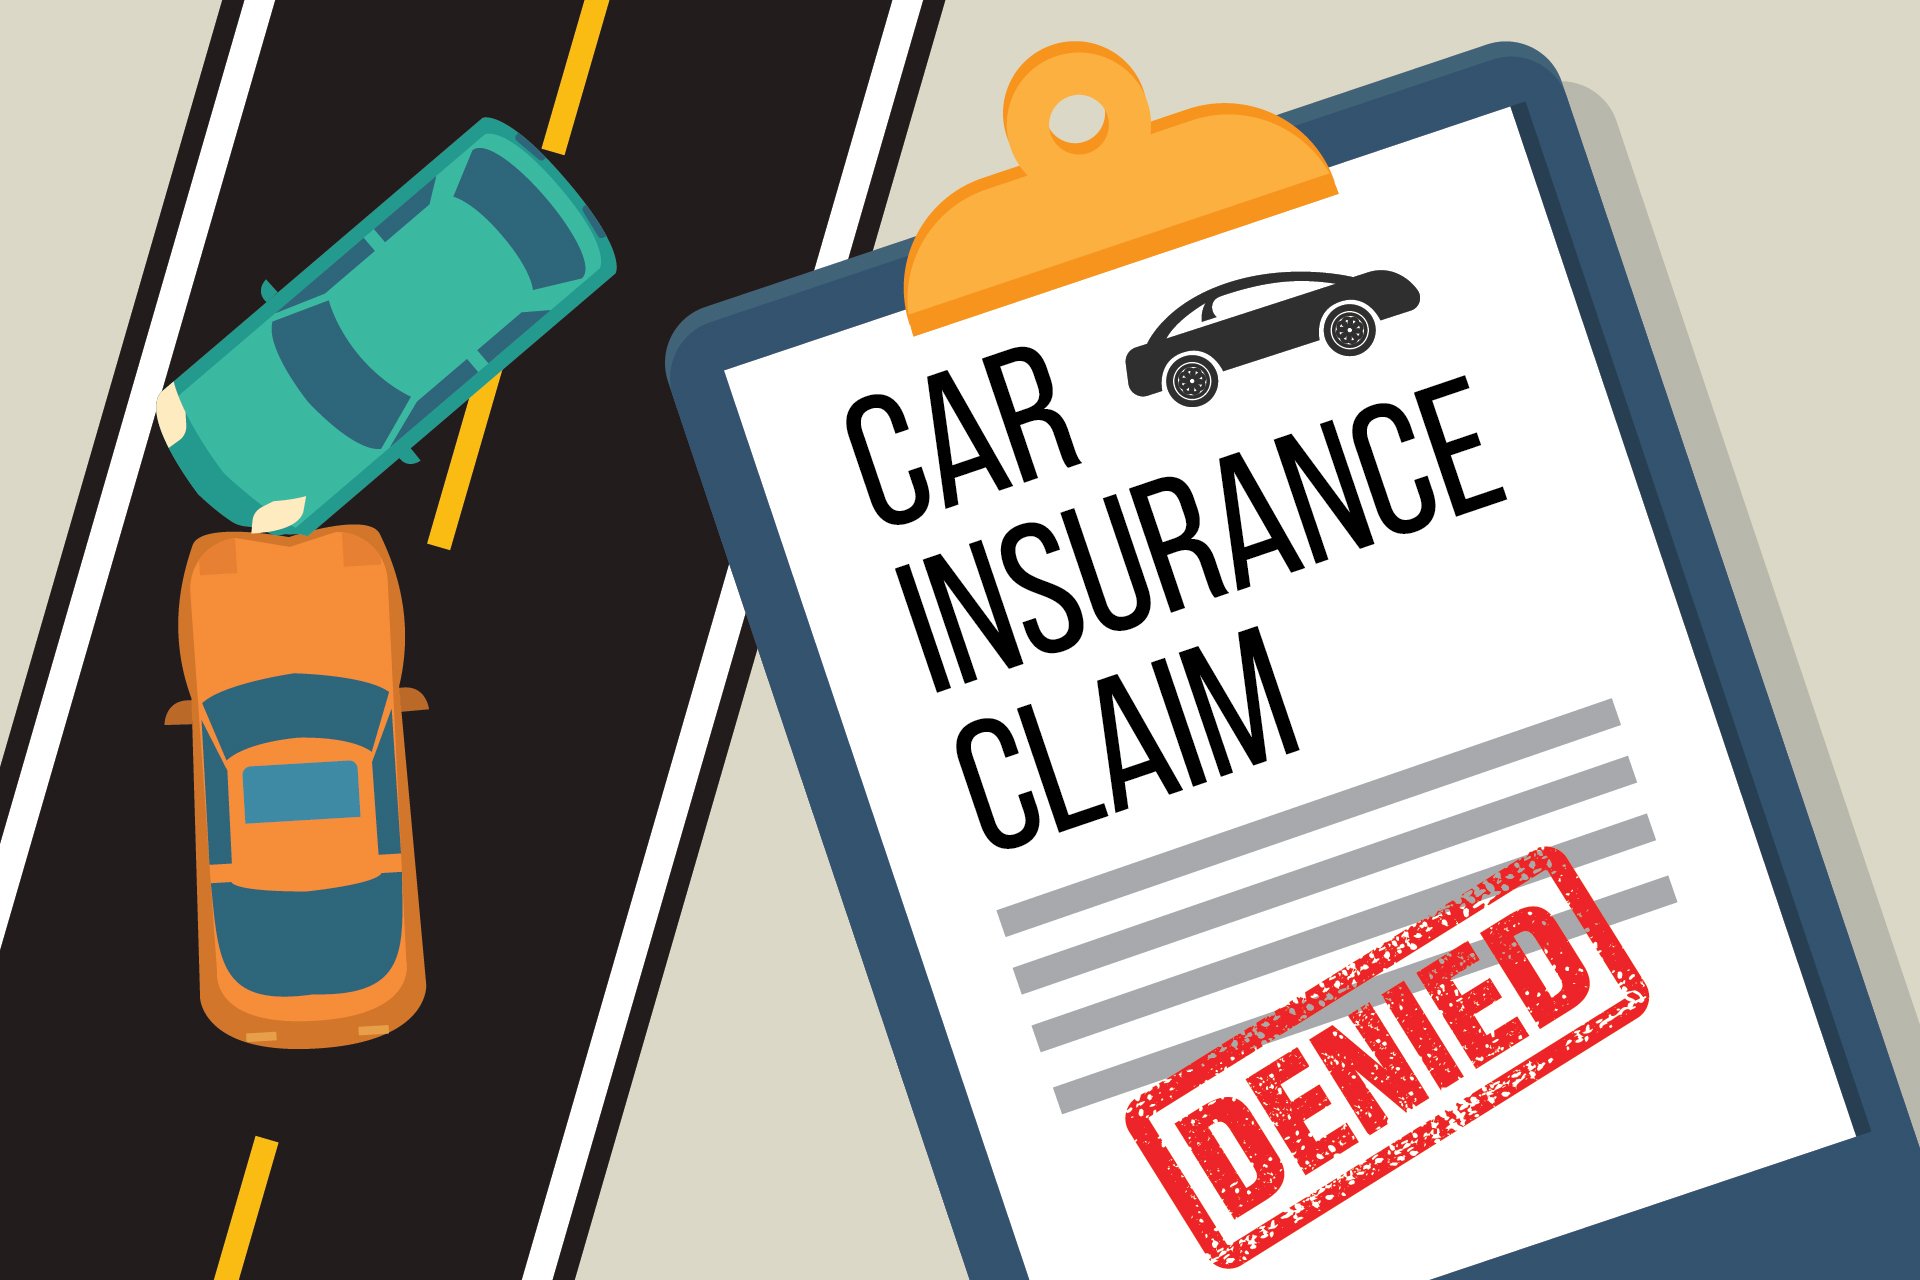 Car insurance accident claim denied free image download